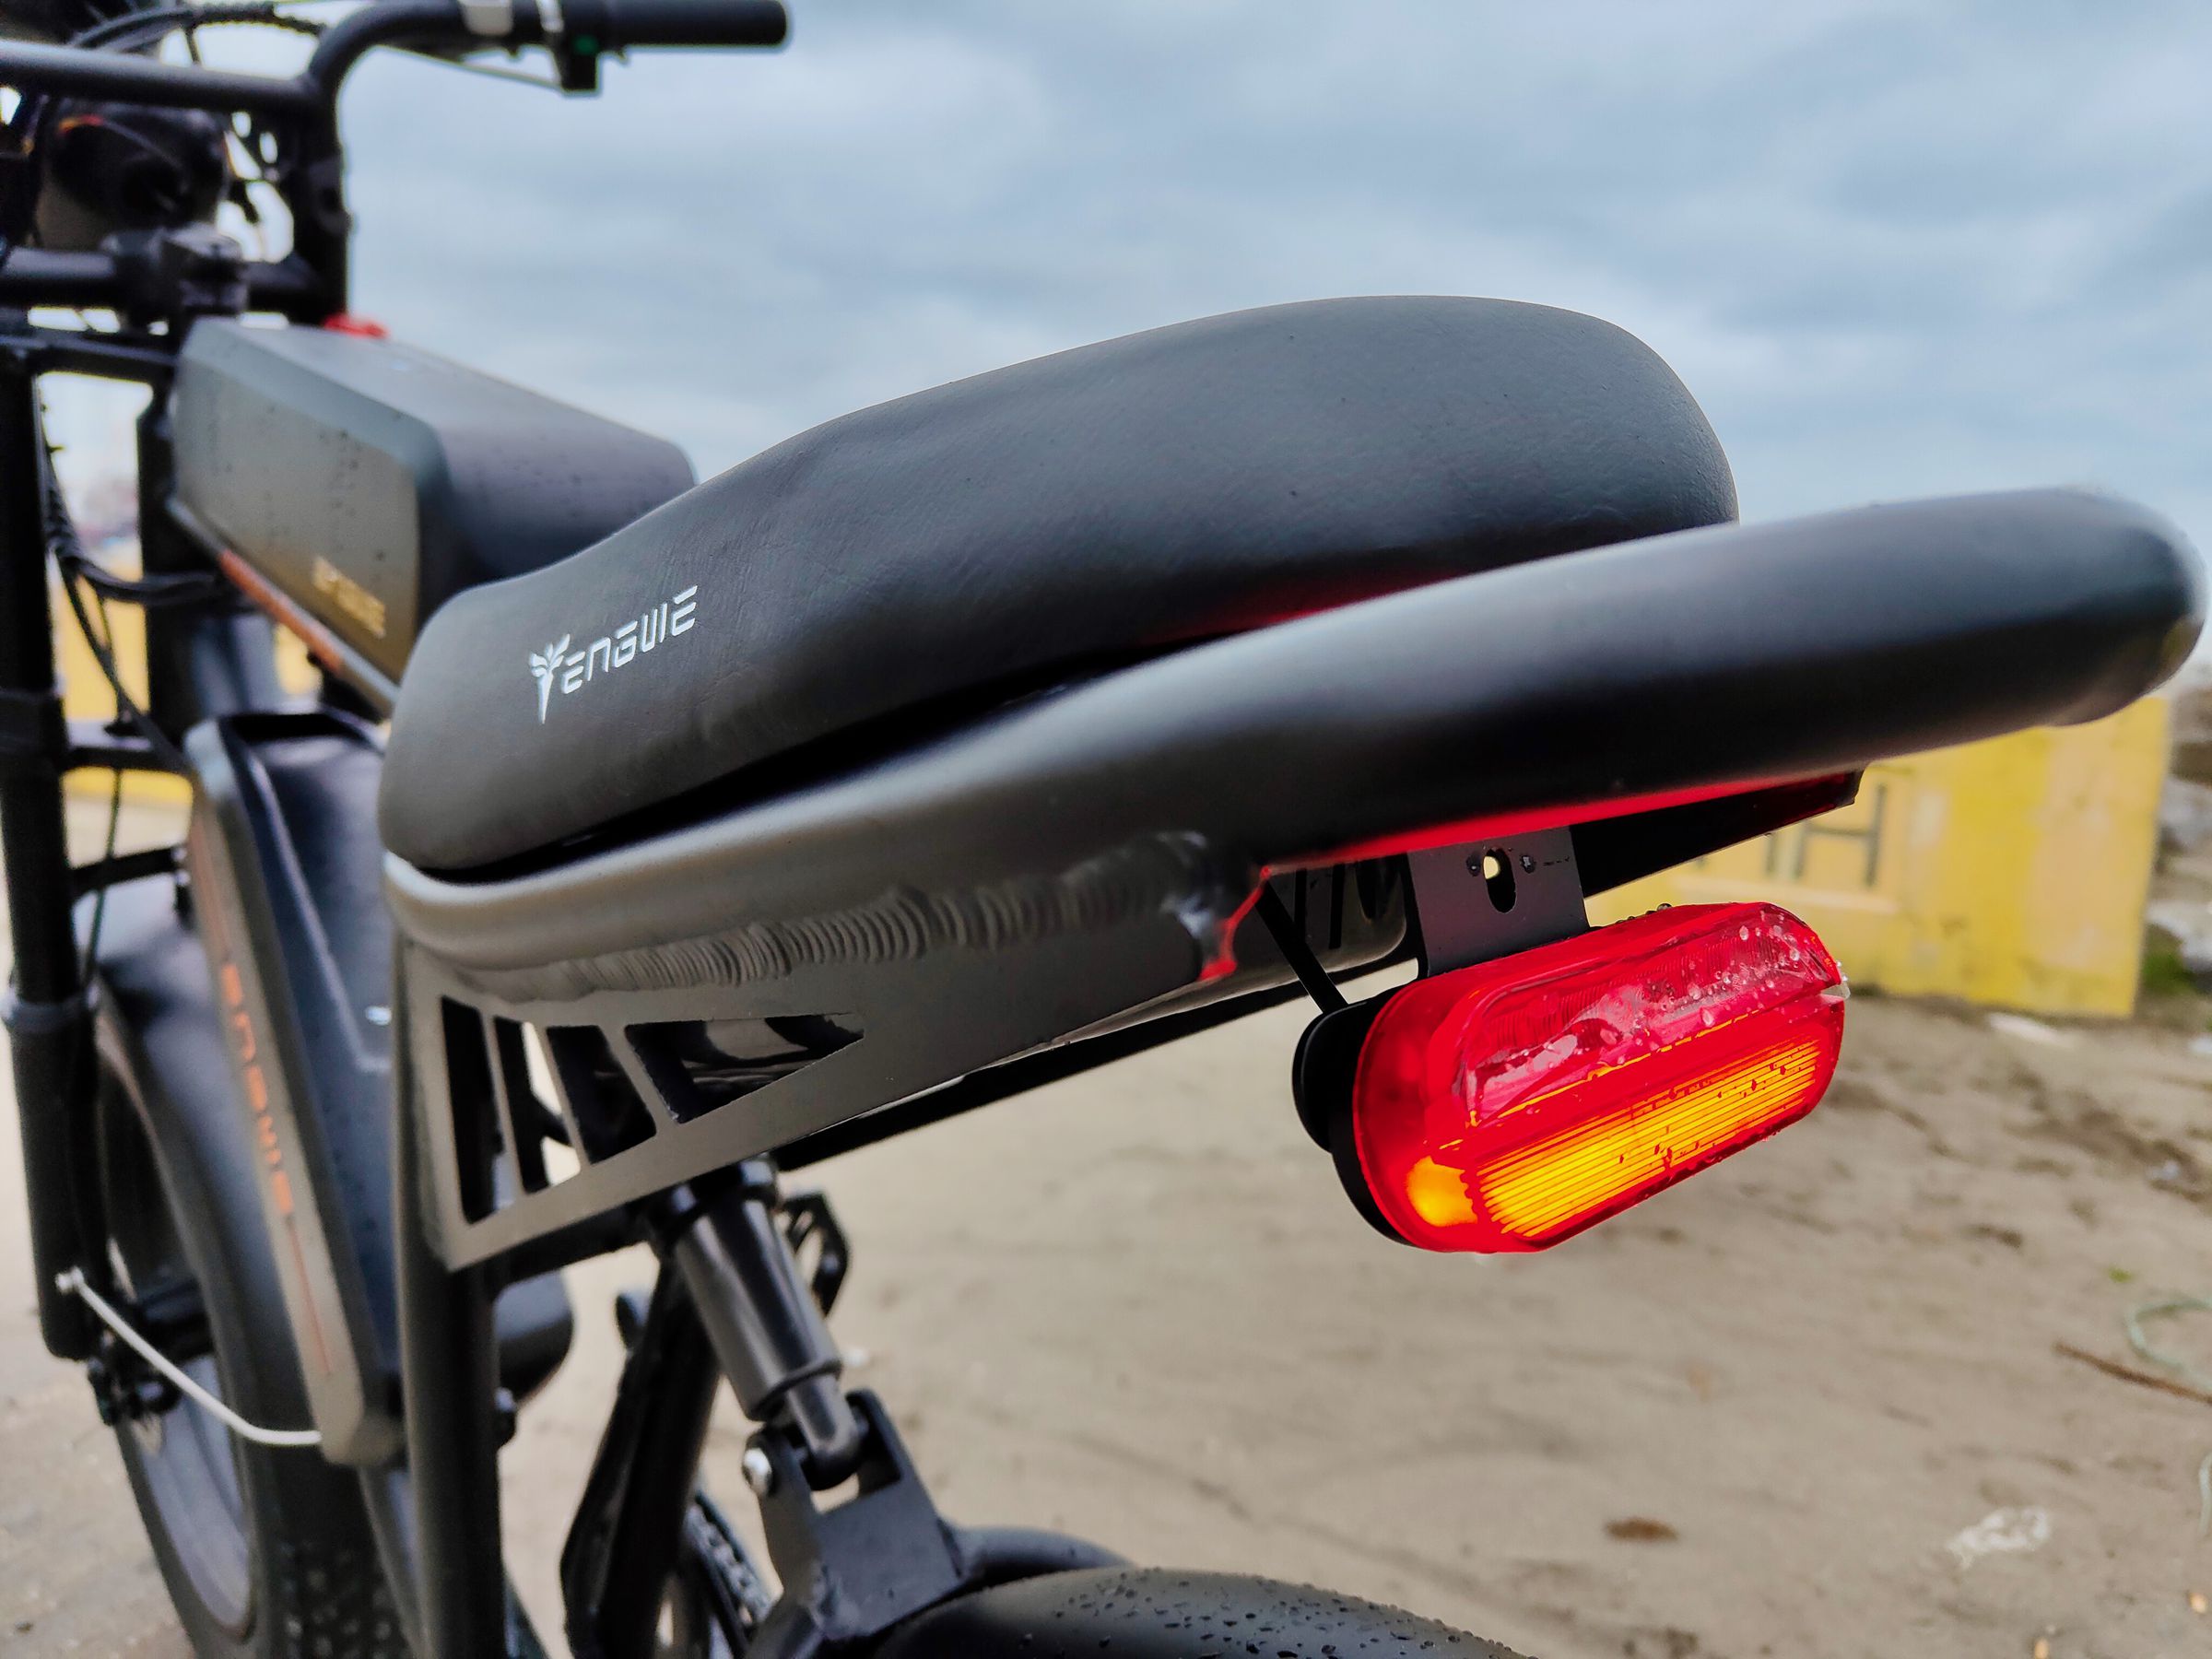 The rear running light is bright and works as a brake light warning.